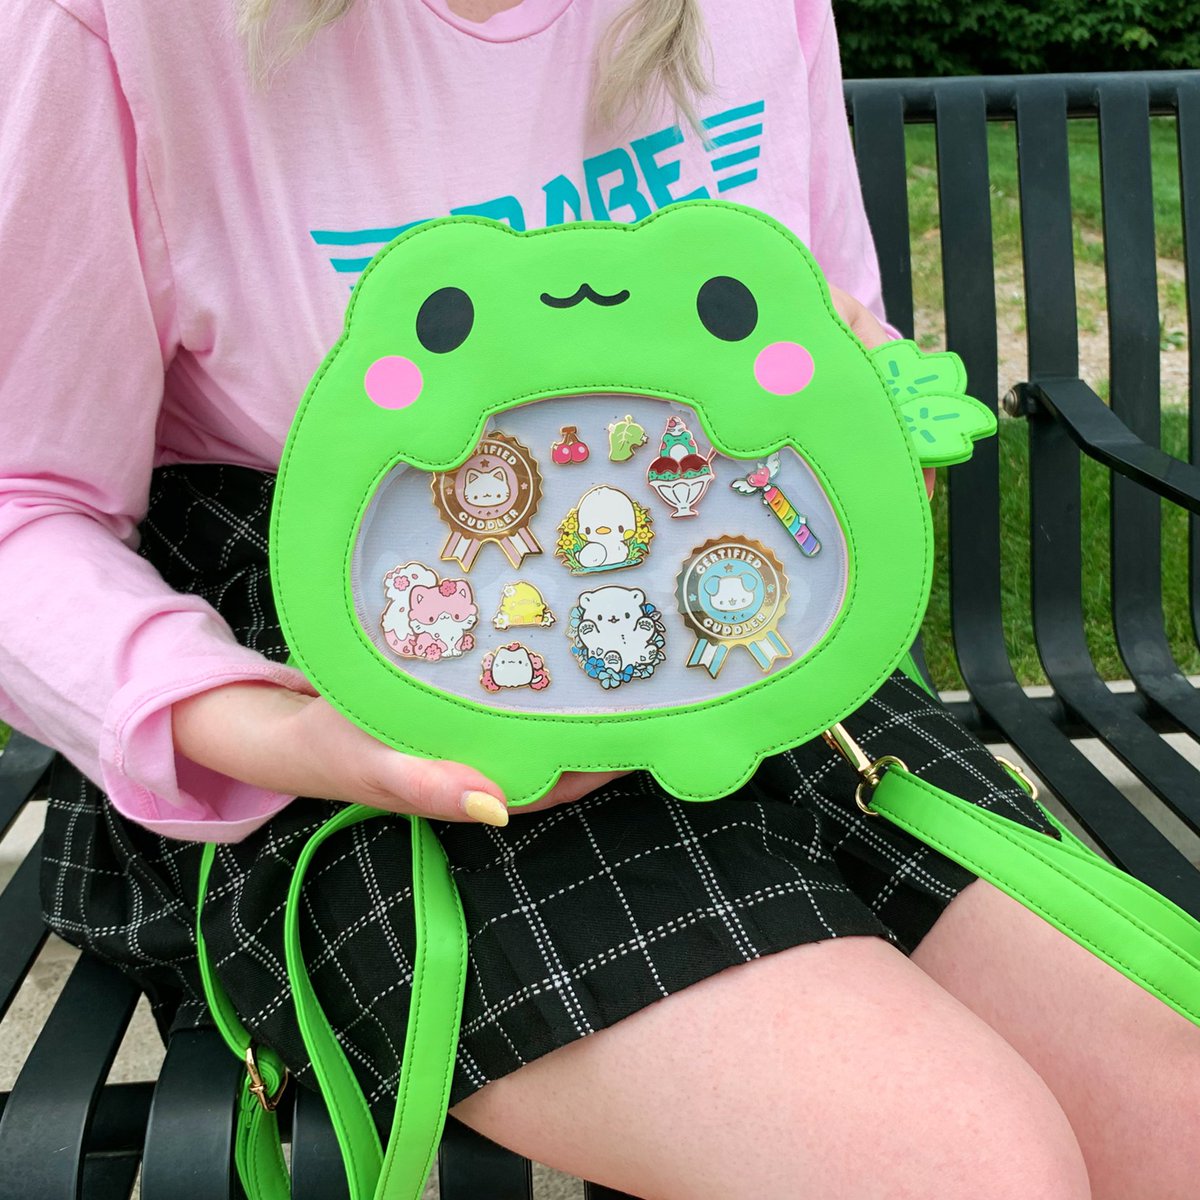 Froggie ita bag sample has arrived! ^o^/ 🌱You'll be able to snag one of these bois via my upcoming Kickstarter (launch date goal is currently late-July)!! More info next week ♡